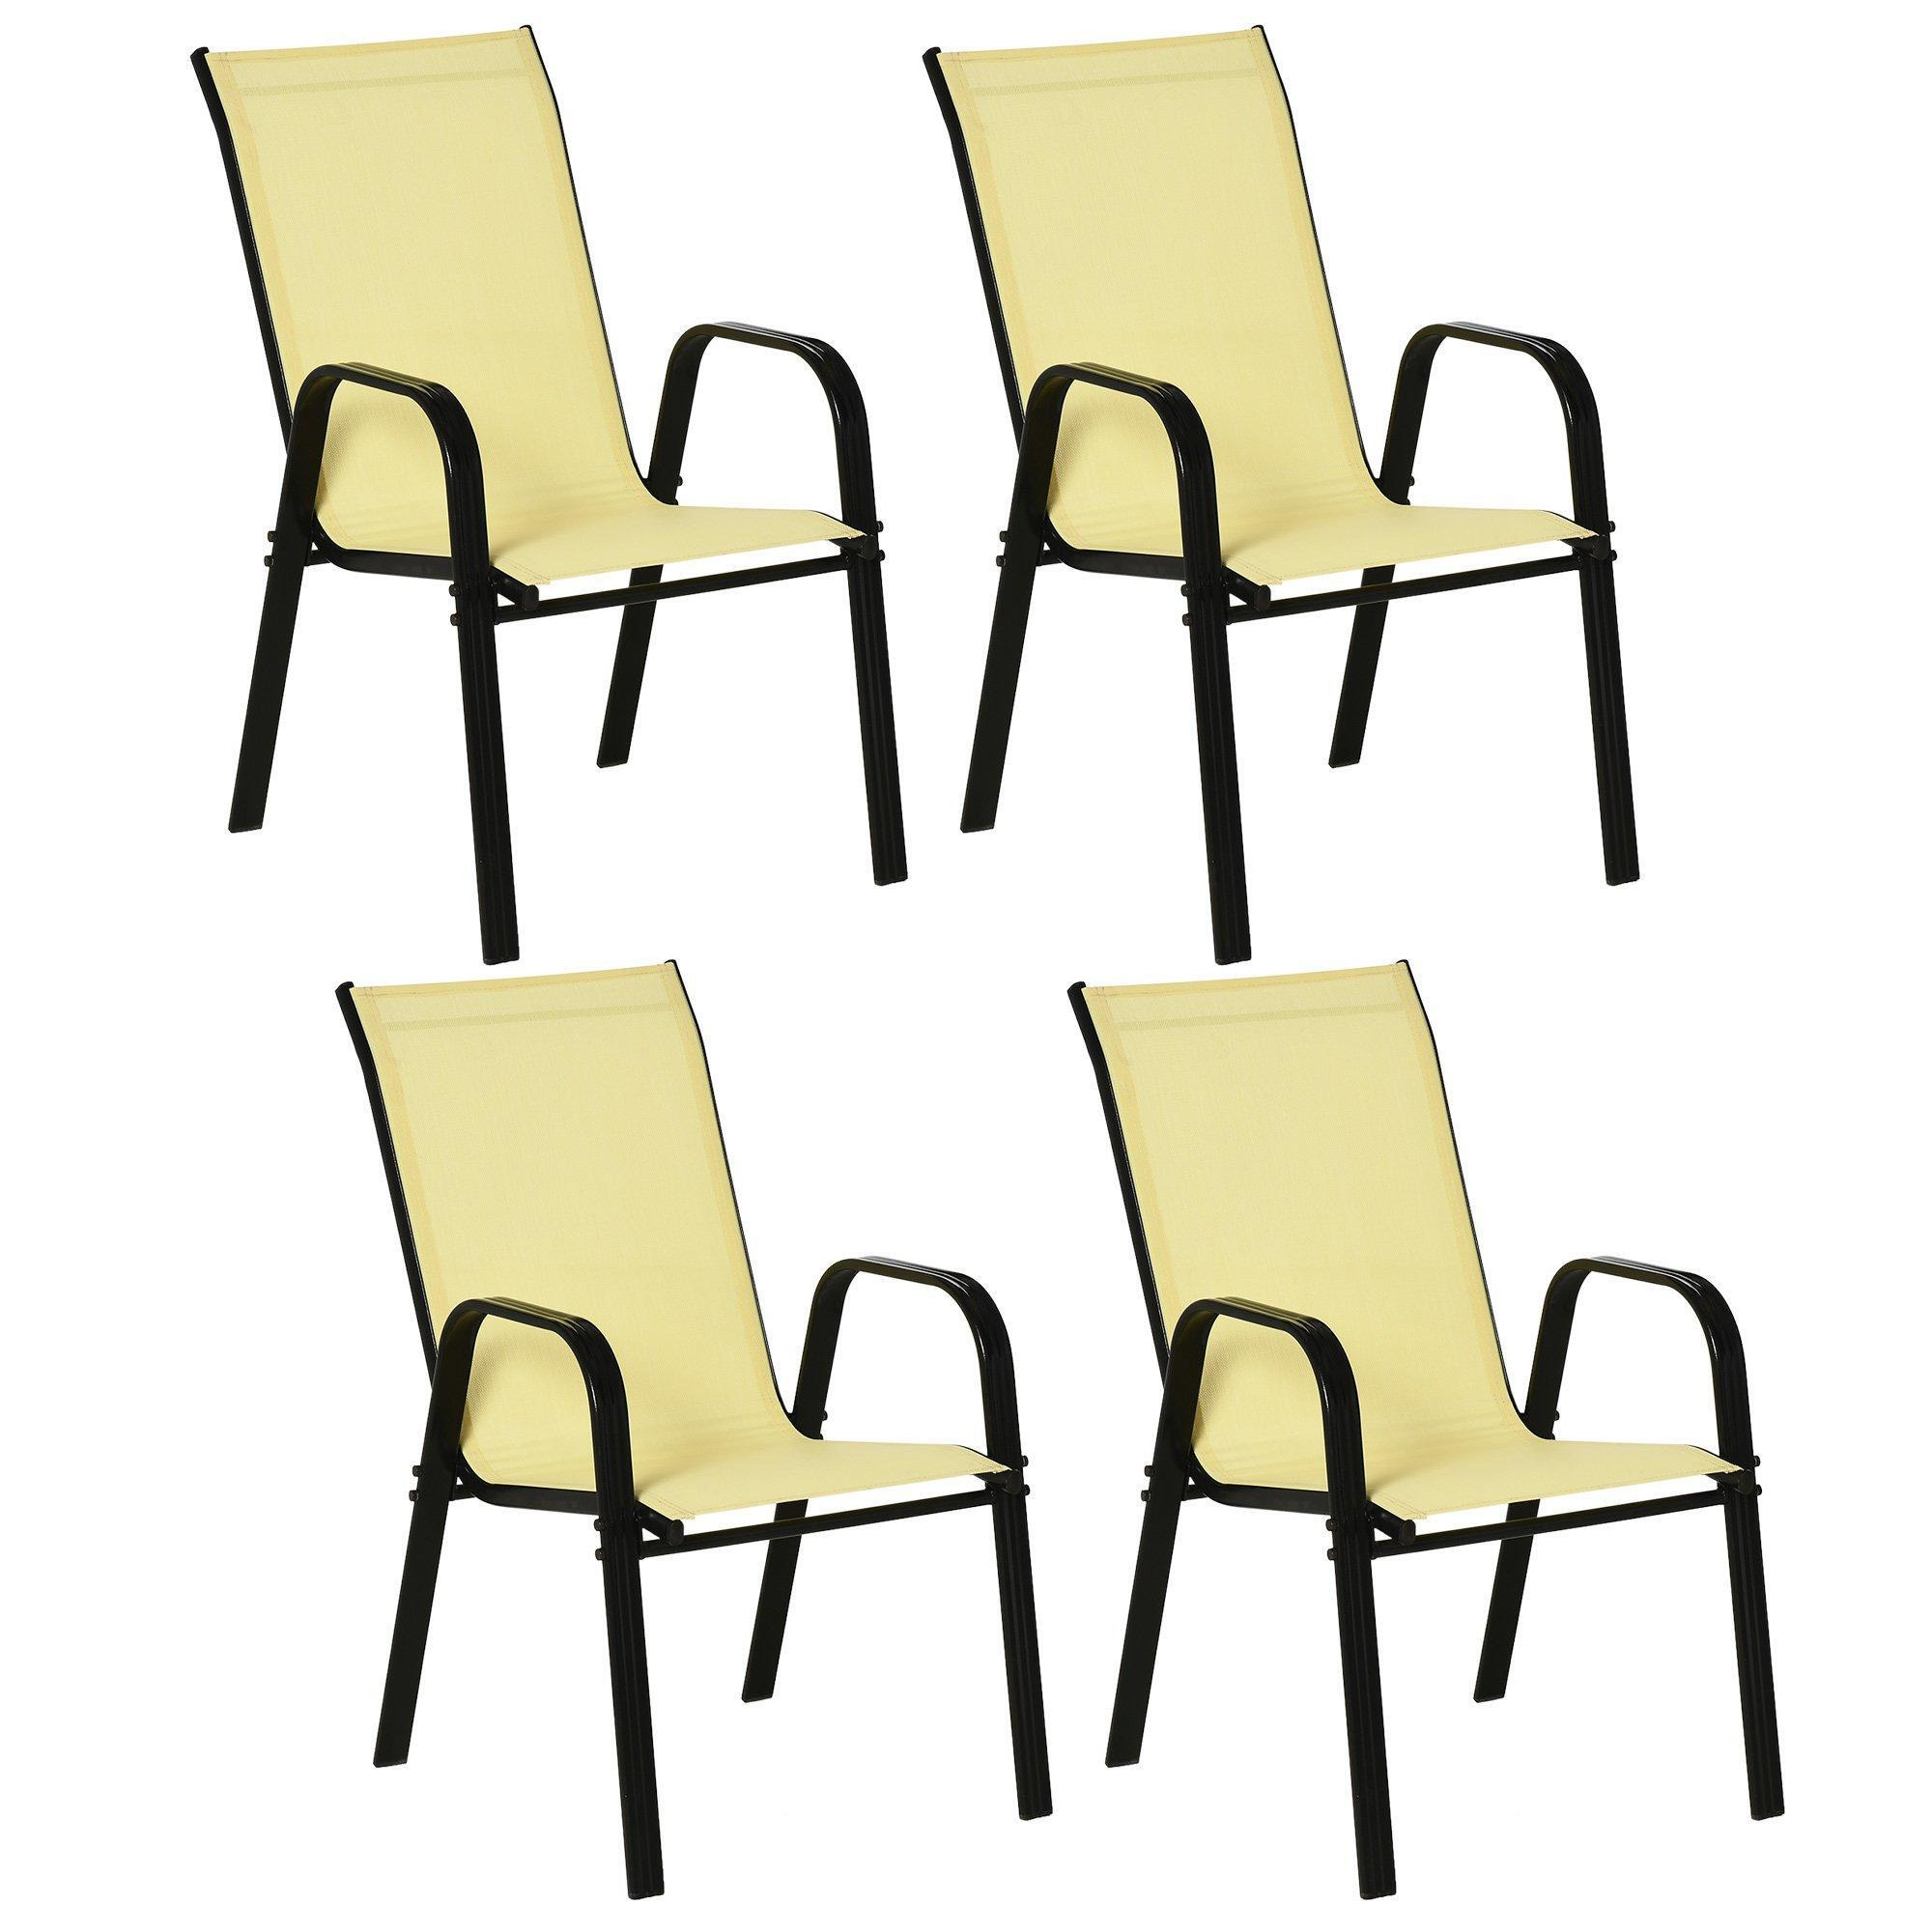 Set of 4 Garden Dining Chair Set Outdoor with High Back Armrest - image 1